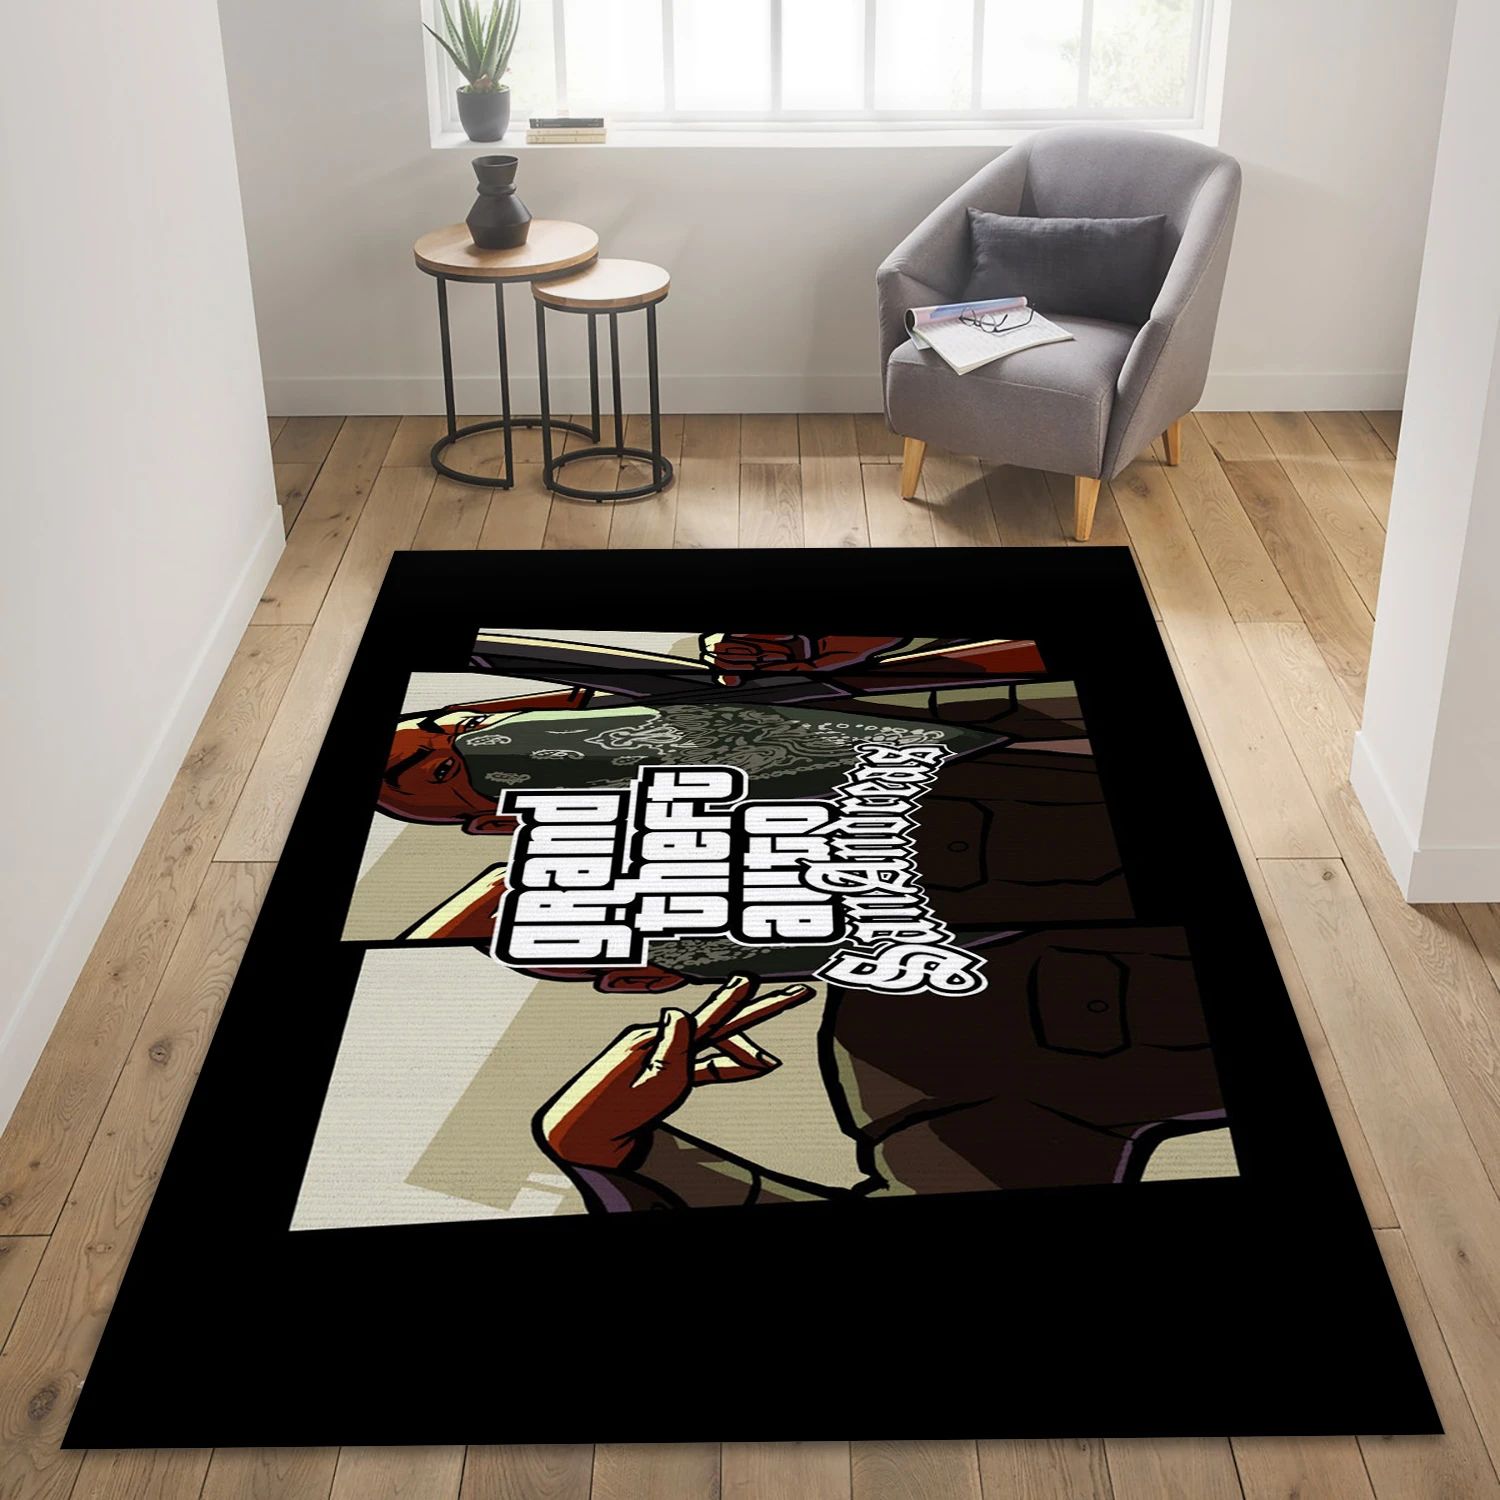 Grand Theft Auto San Andreas Video Game Reangle Rug, Bedroom Rug - US Decor - Indoor Outdoor Rugs